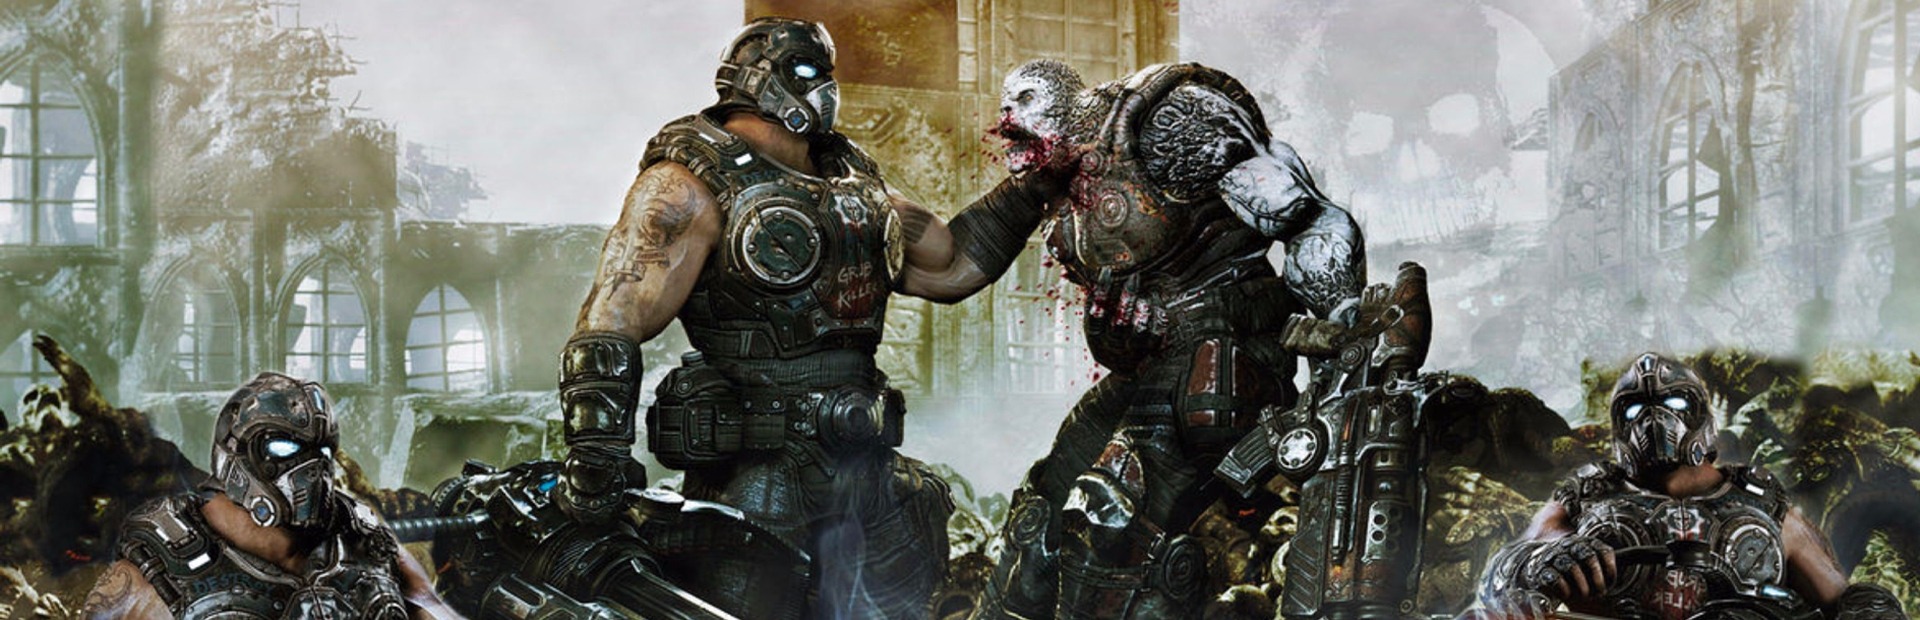 Gears of War 4: Ultimate Edition Allows You To Play The Game 4 Days Before  Launch